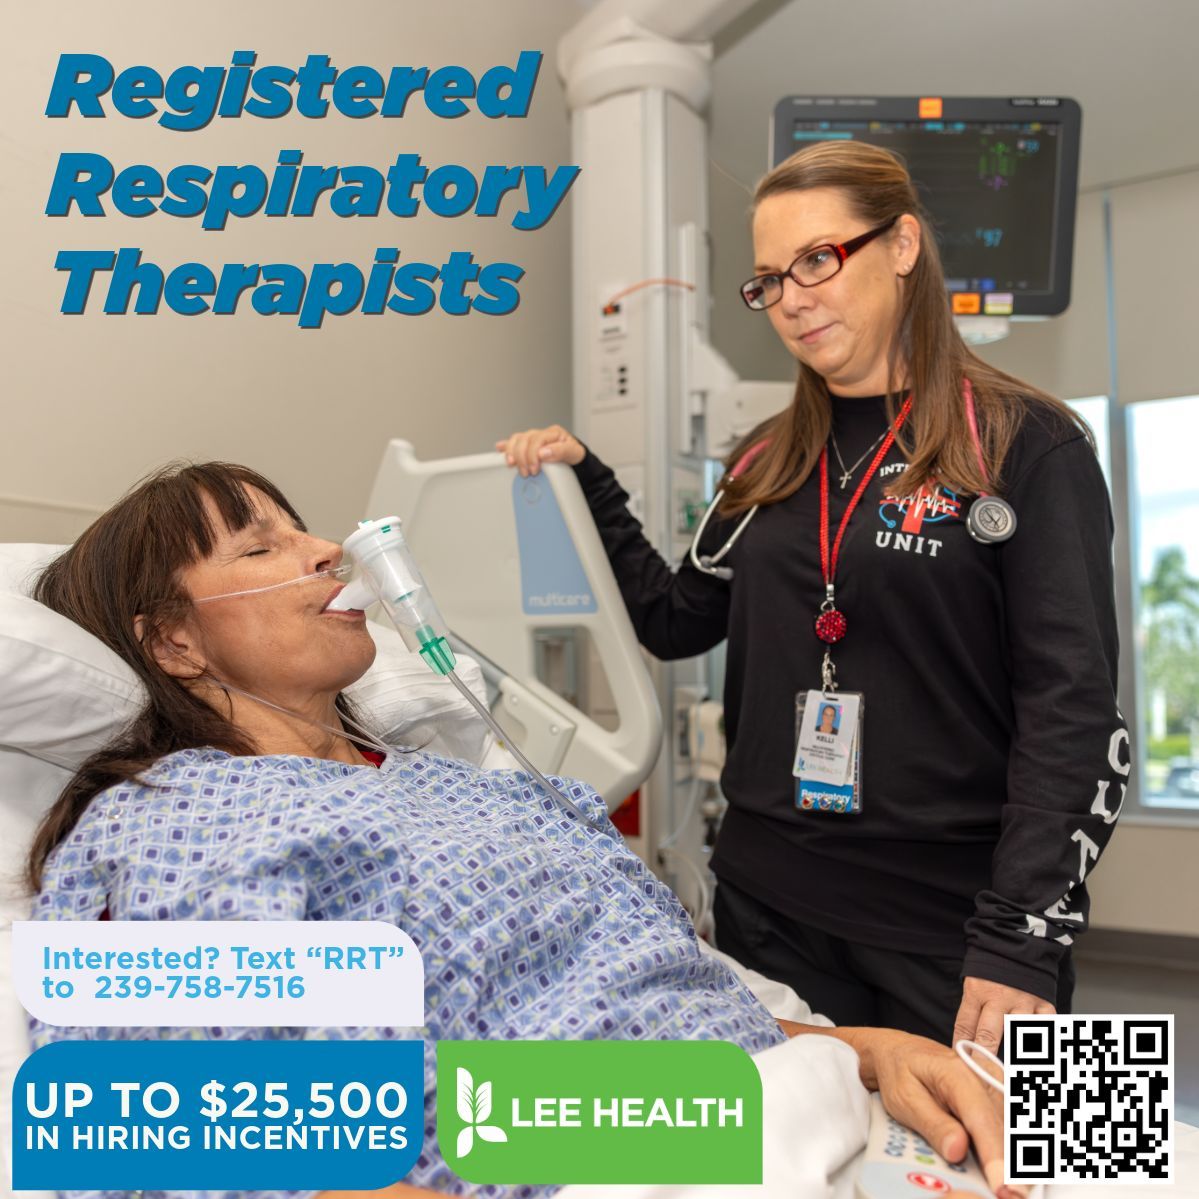 🌬️ Join Our Team as a Registered Respiratory Therapist!

Click the link to chat and schedule an interview today: oli.vi/ZidOt1

#LeeHealth #RespiratoryTherapist #HealthcareCareers #FortMyers #CapeCoral #JoinOurTeam #AARC #Respiratory #RRT